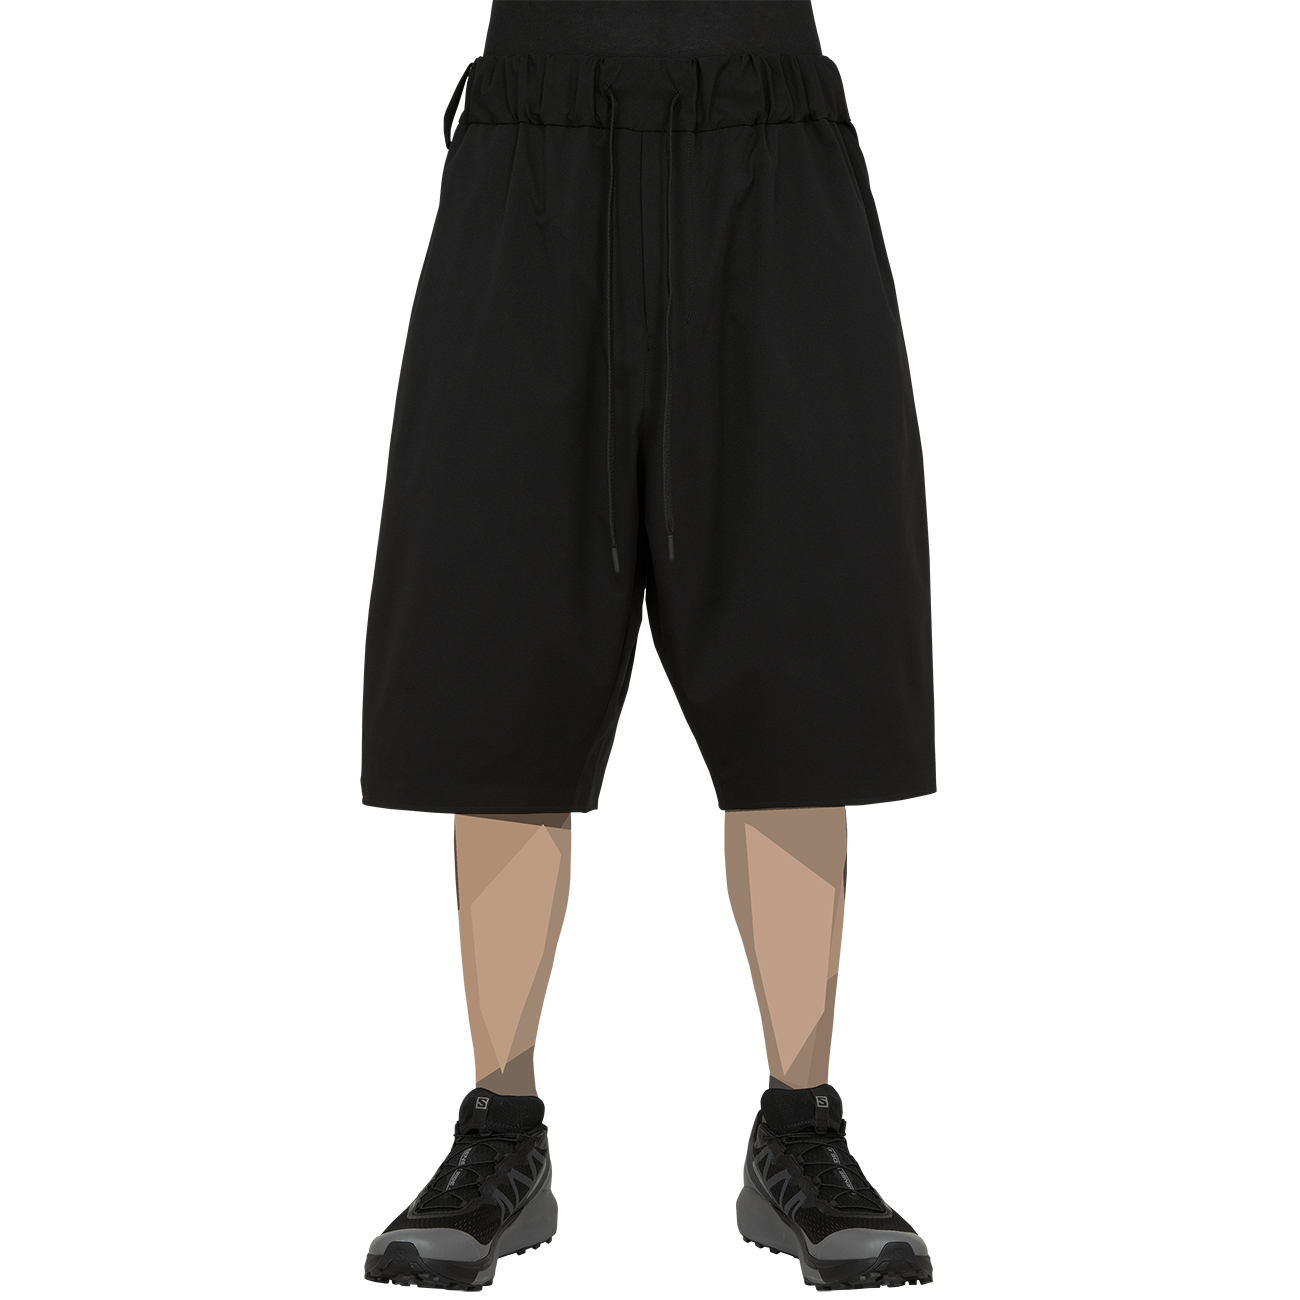 WHITE MOUNTAINEERING BLK (ホワイトマウンテニアリング ビーエルケー) - 22AW STRETCHED SARROUEL SHORTS BLACKの詳細画像2